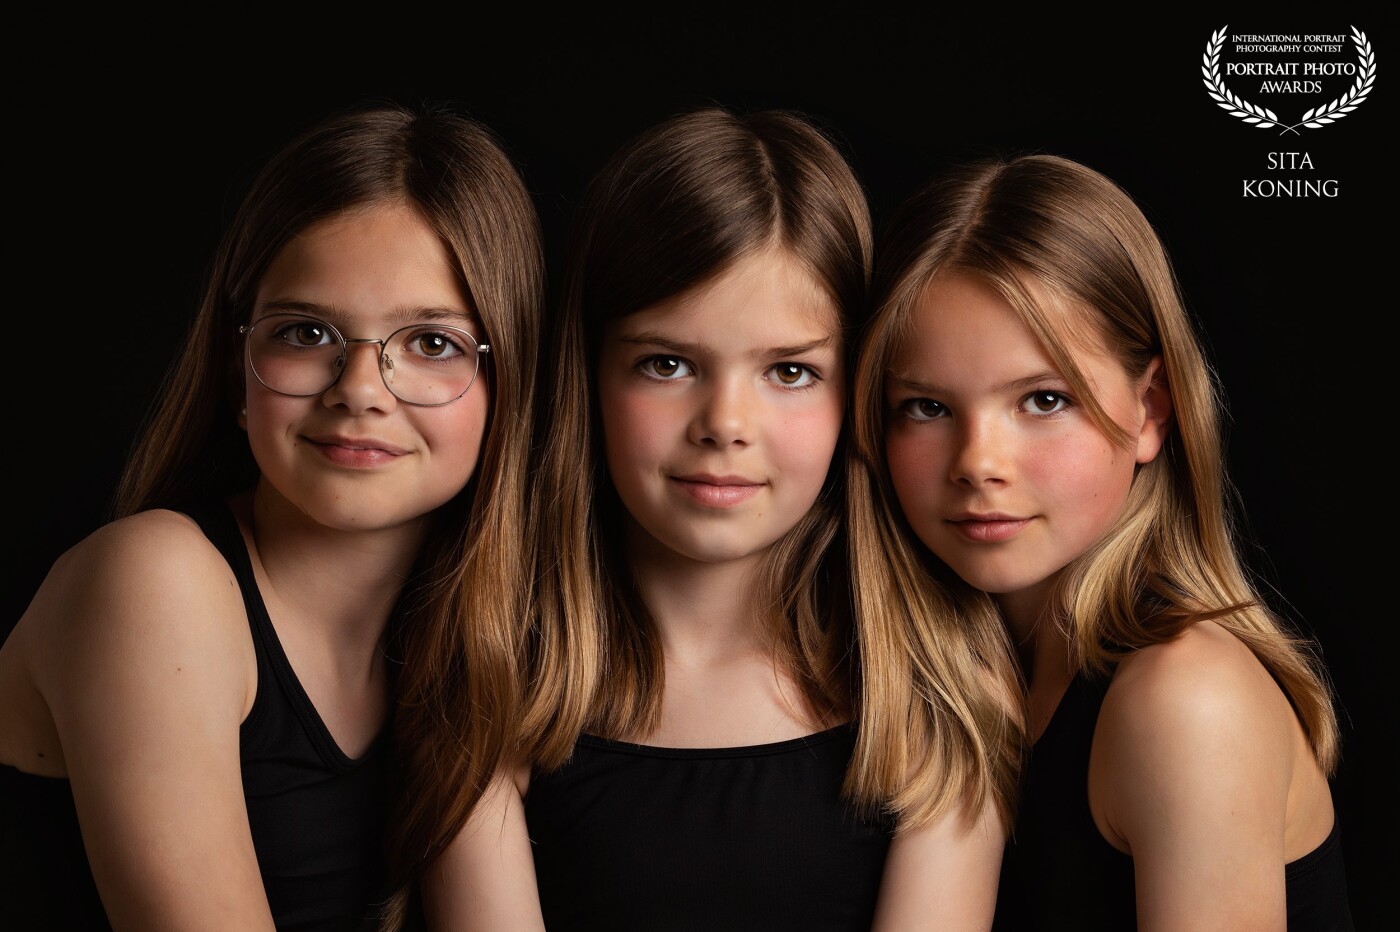 These beautiful 3 sisters photographed in my photostudio. Love the clean look, black background with the skin tones of these girls. The soft looks, just al little smile with the eyes.